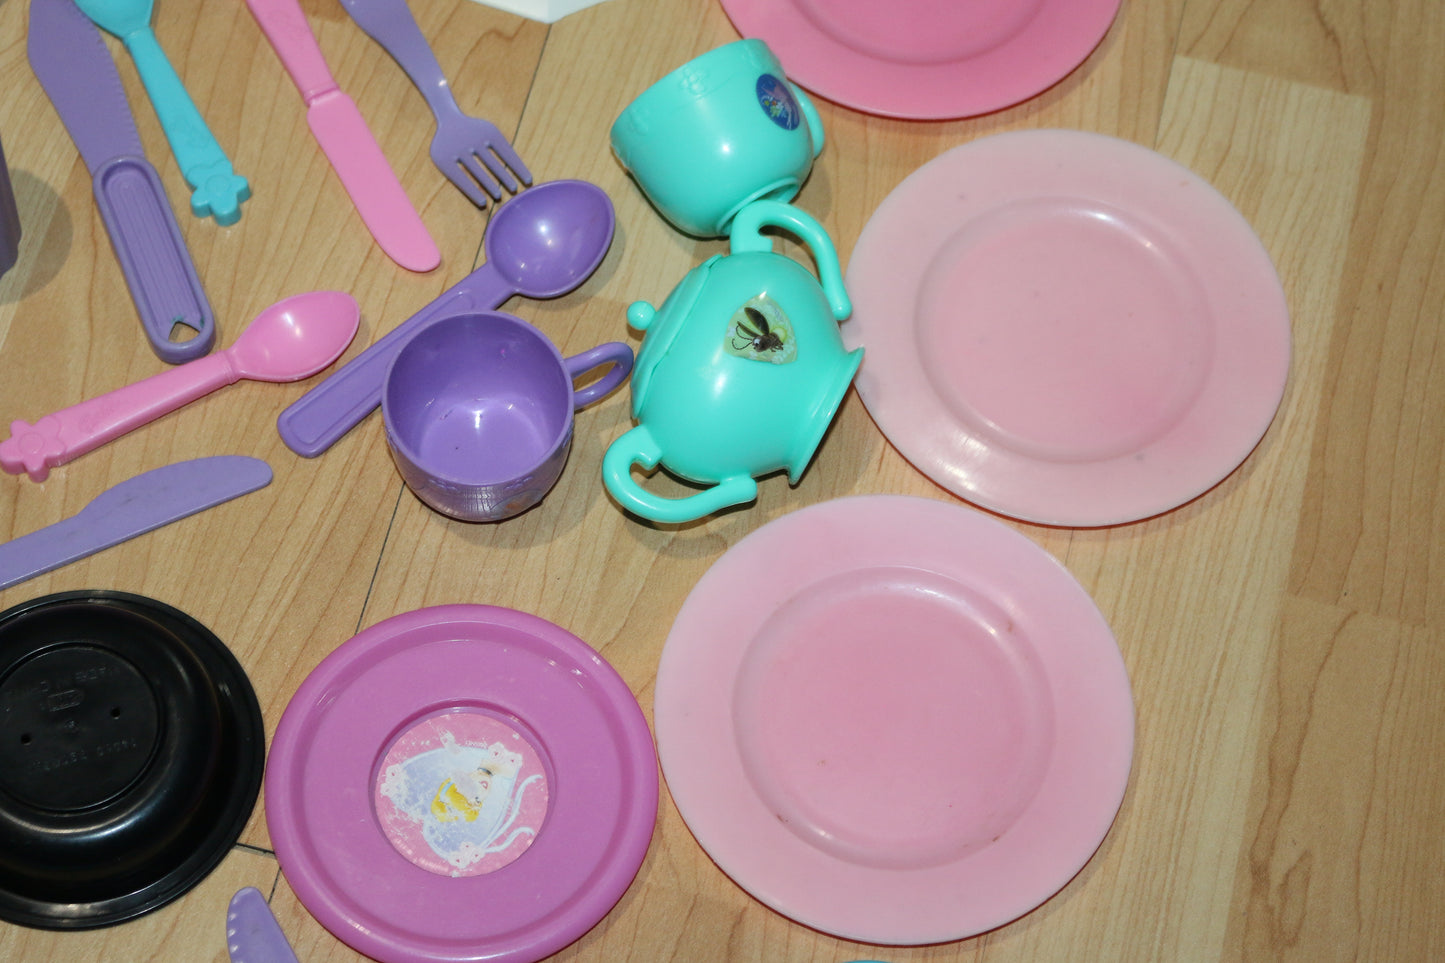 CDI Play kitchen Dishes Mixed Lot Played toys accessories for kids W Condition